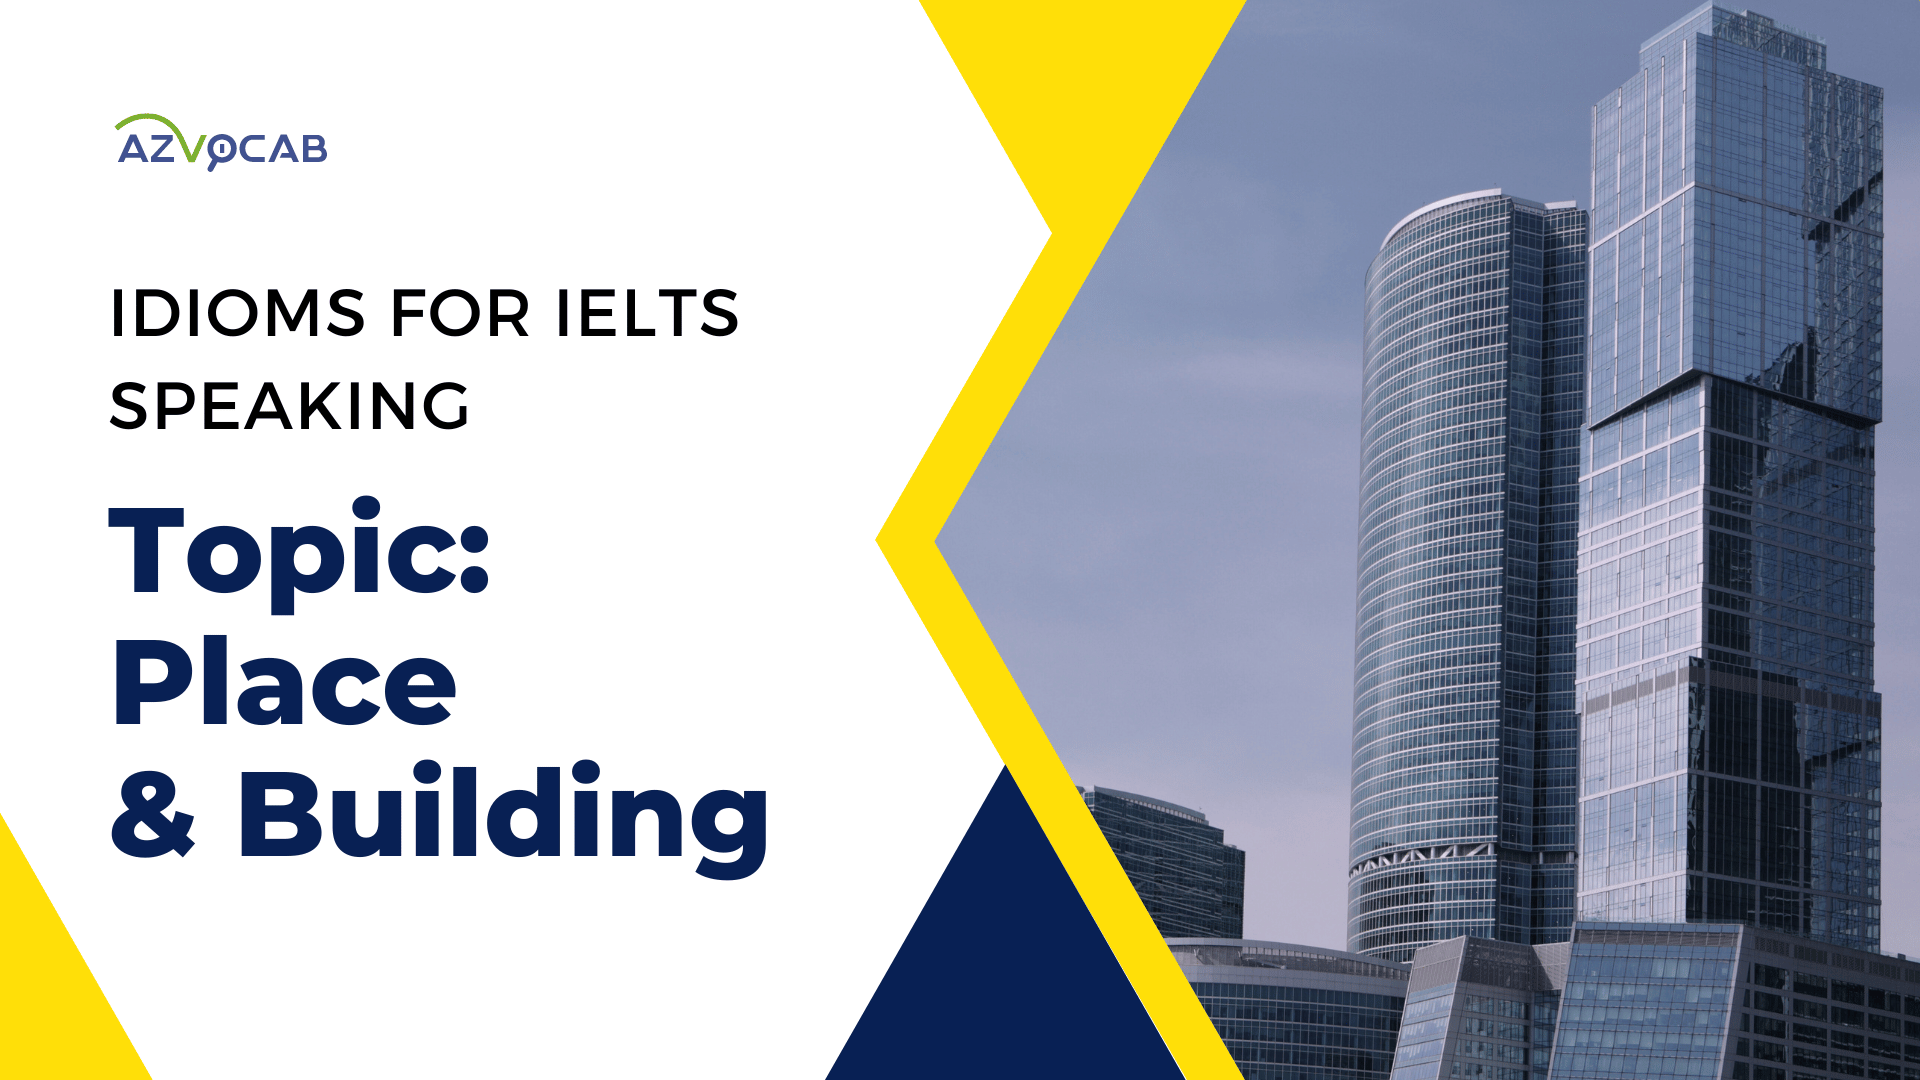 Idioms for IELTS Speaking Place and Building